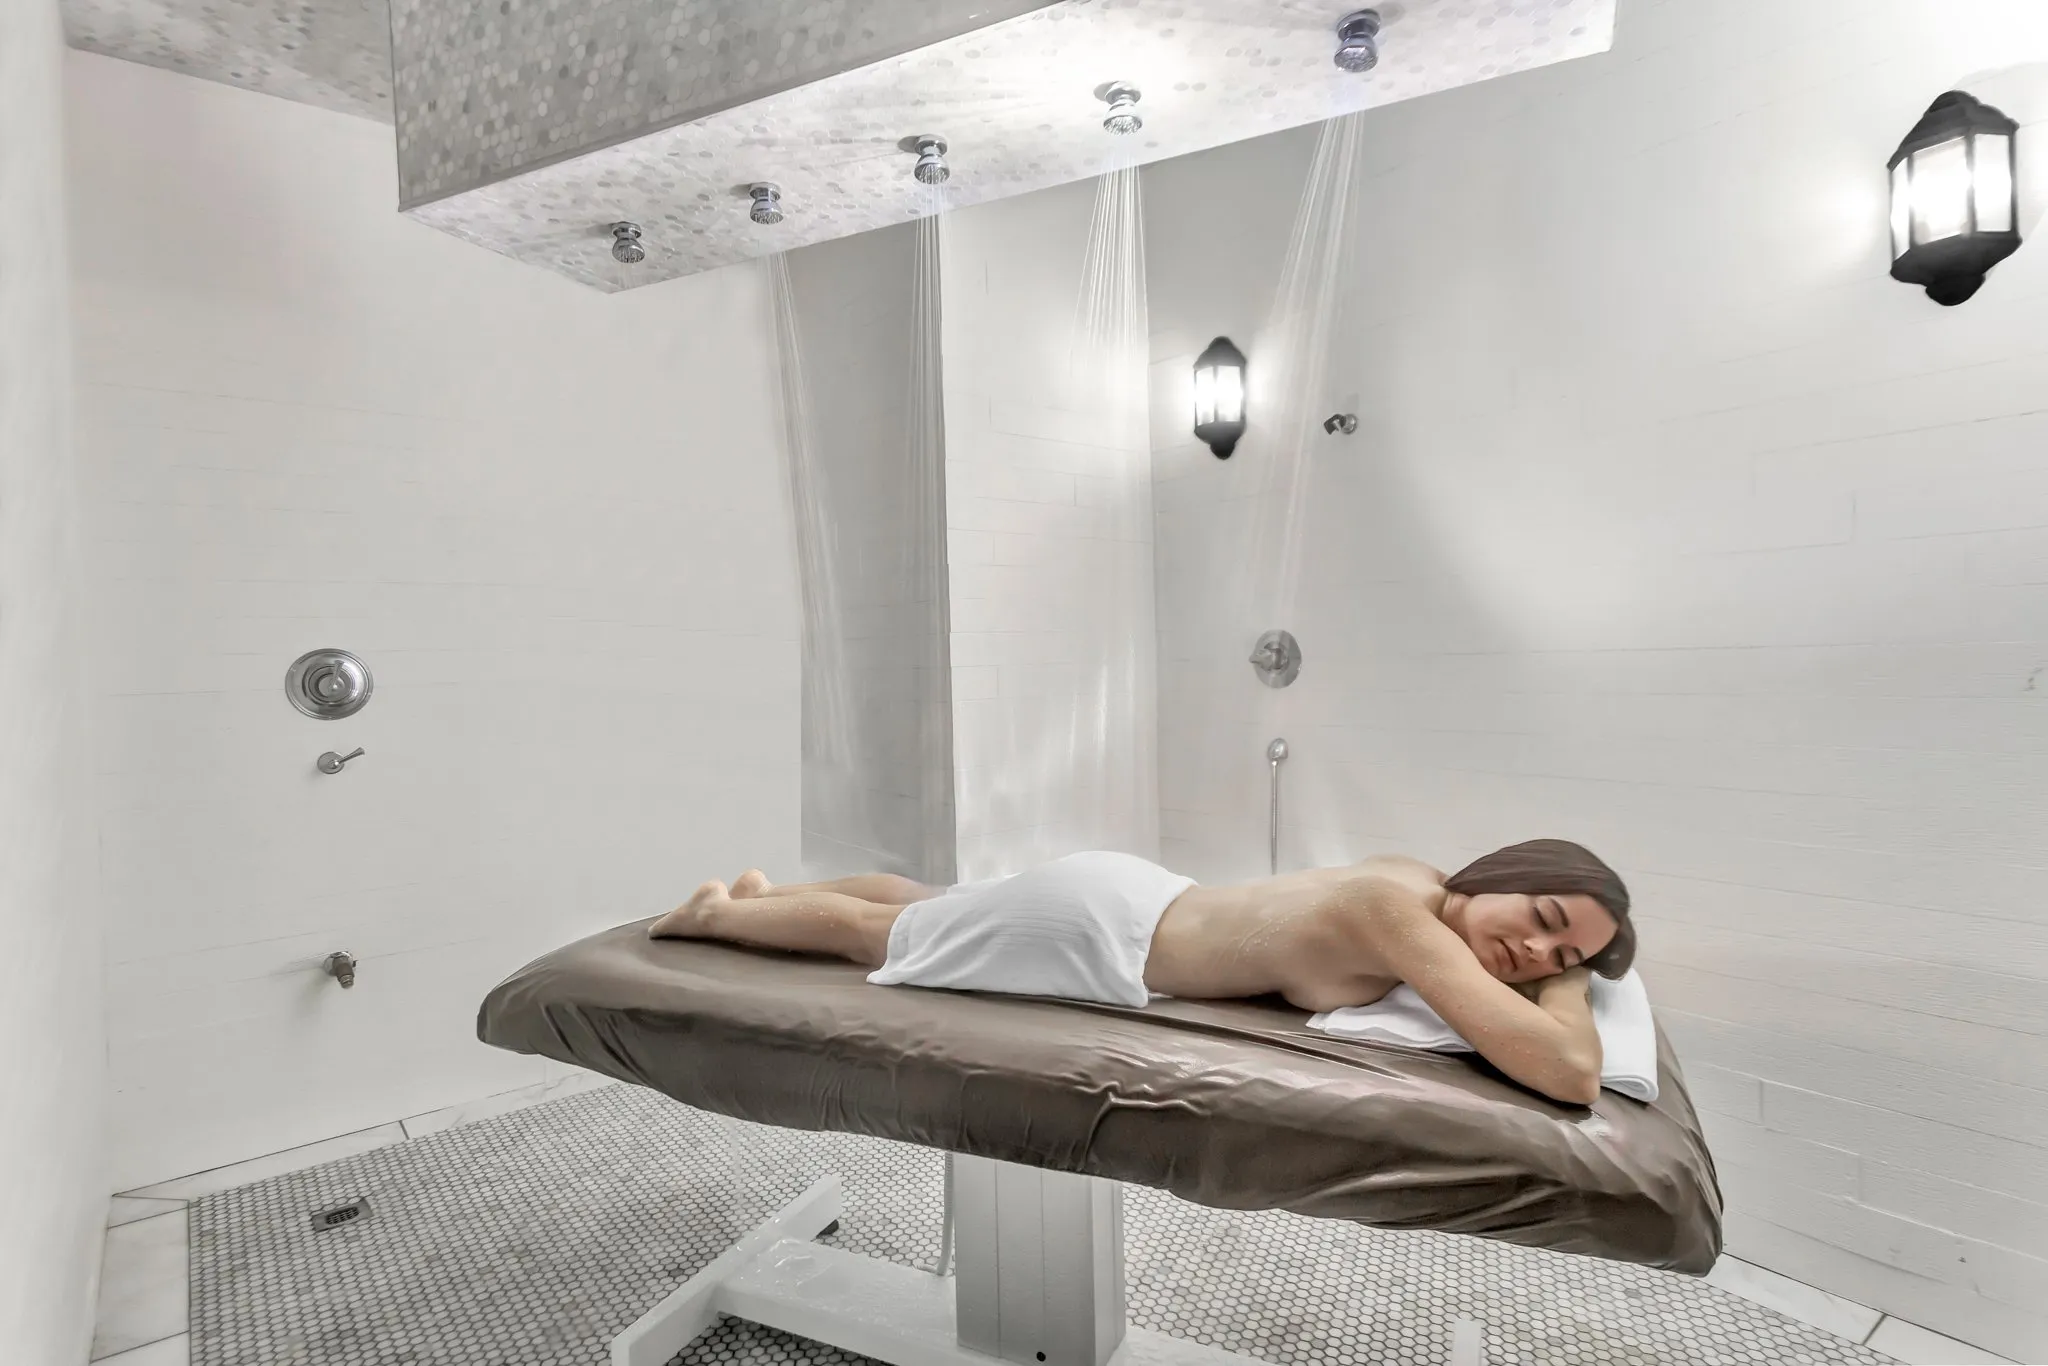 Spa Treatments in France, Europe | SPAs,Massages - Rated 1.1